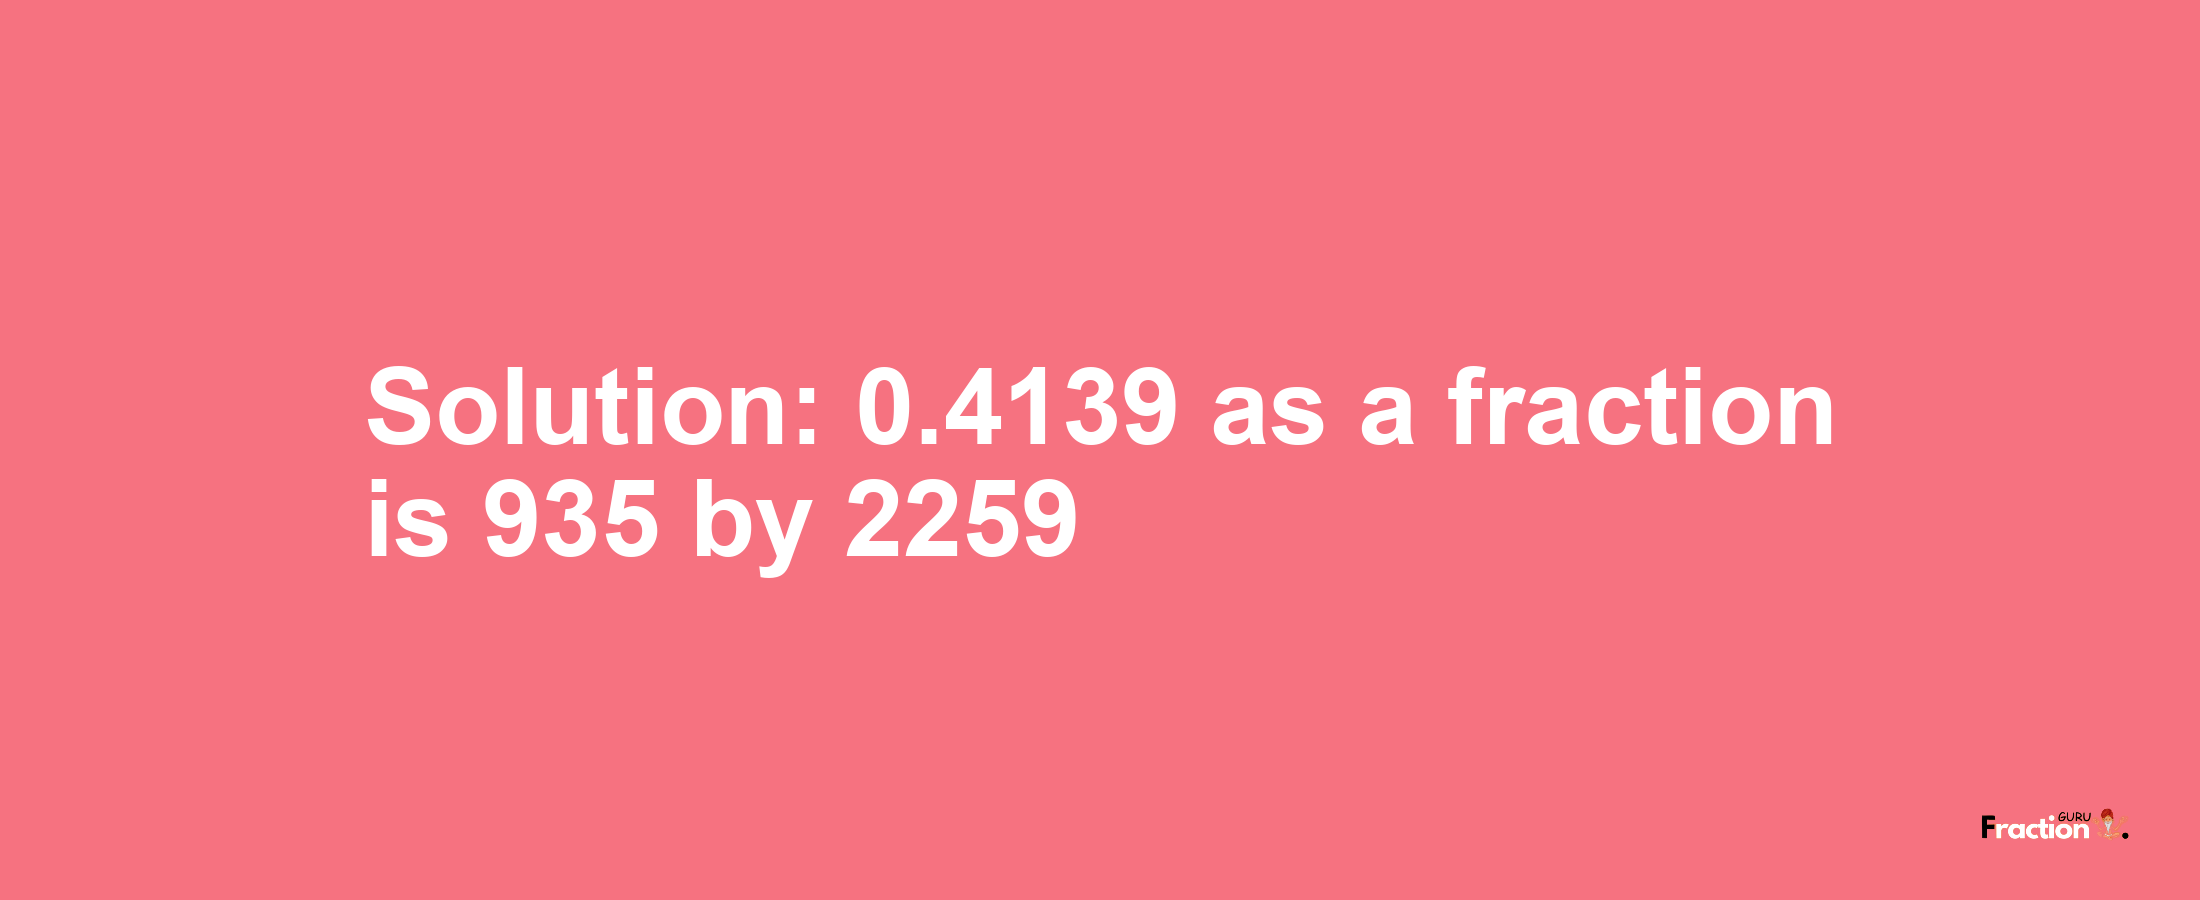 Solution:0.4139 as a fraction is 935/2259